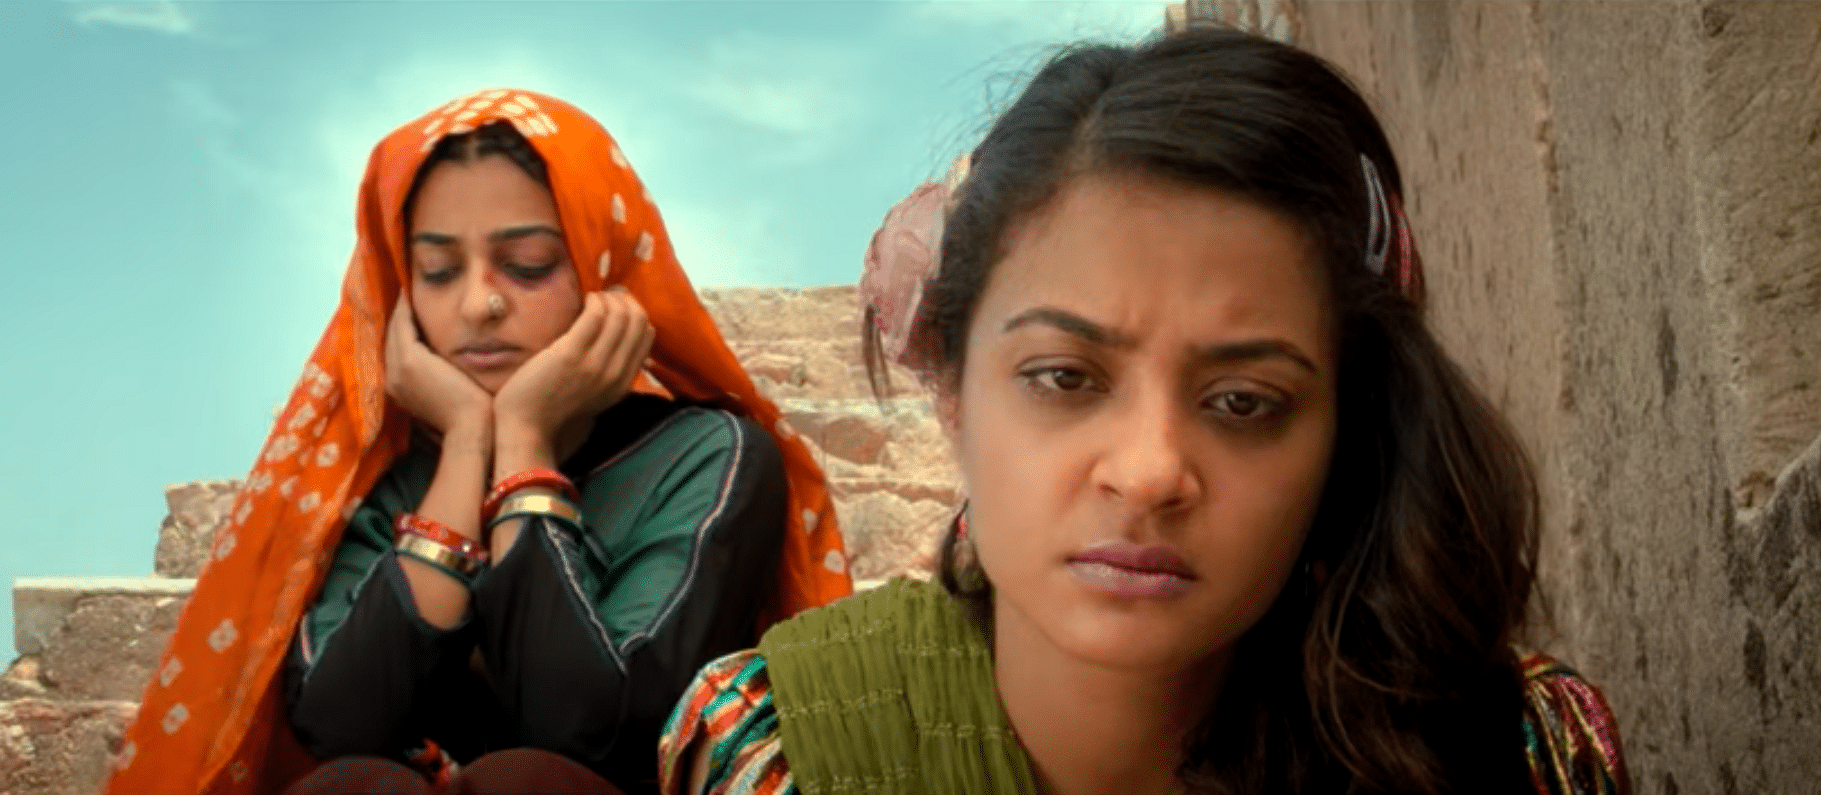 Women's Day: 11 films with a phenomenal female lead to watch this month